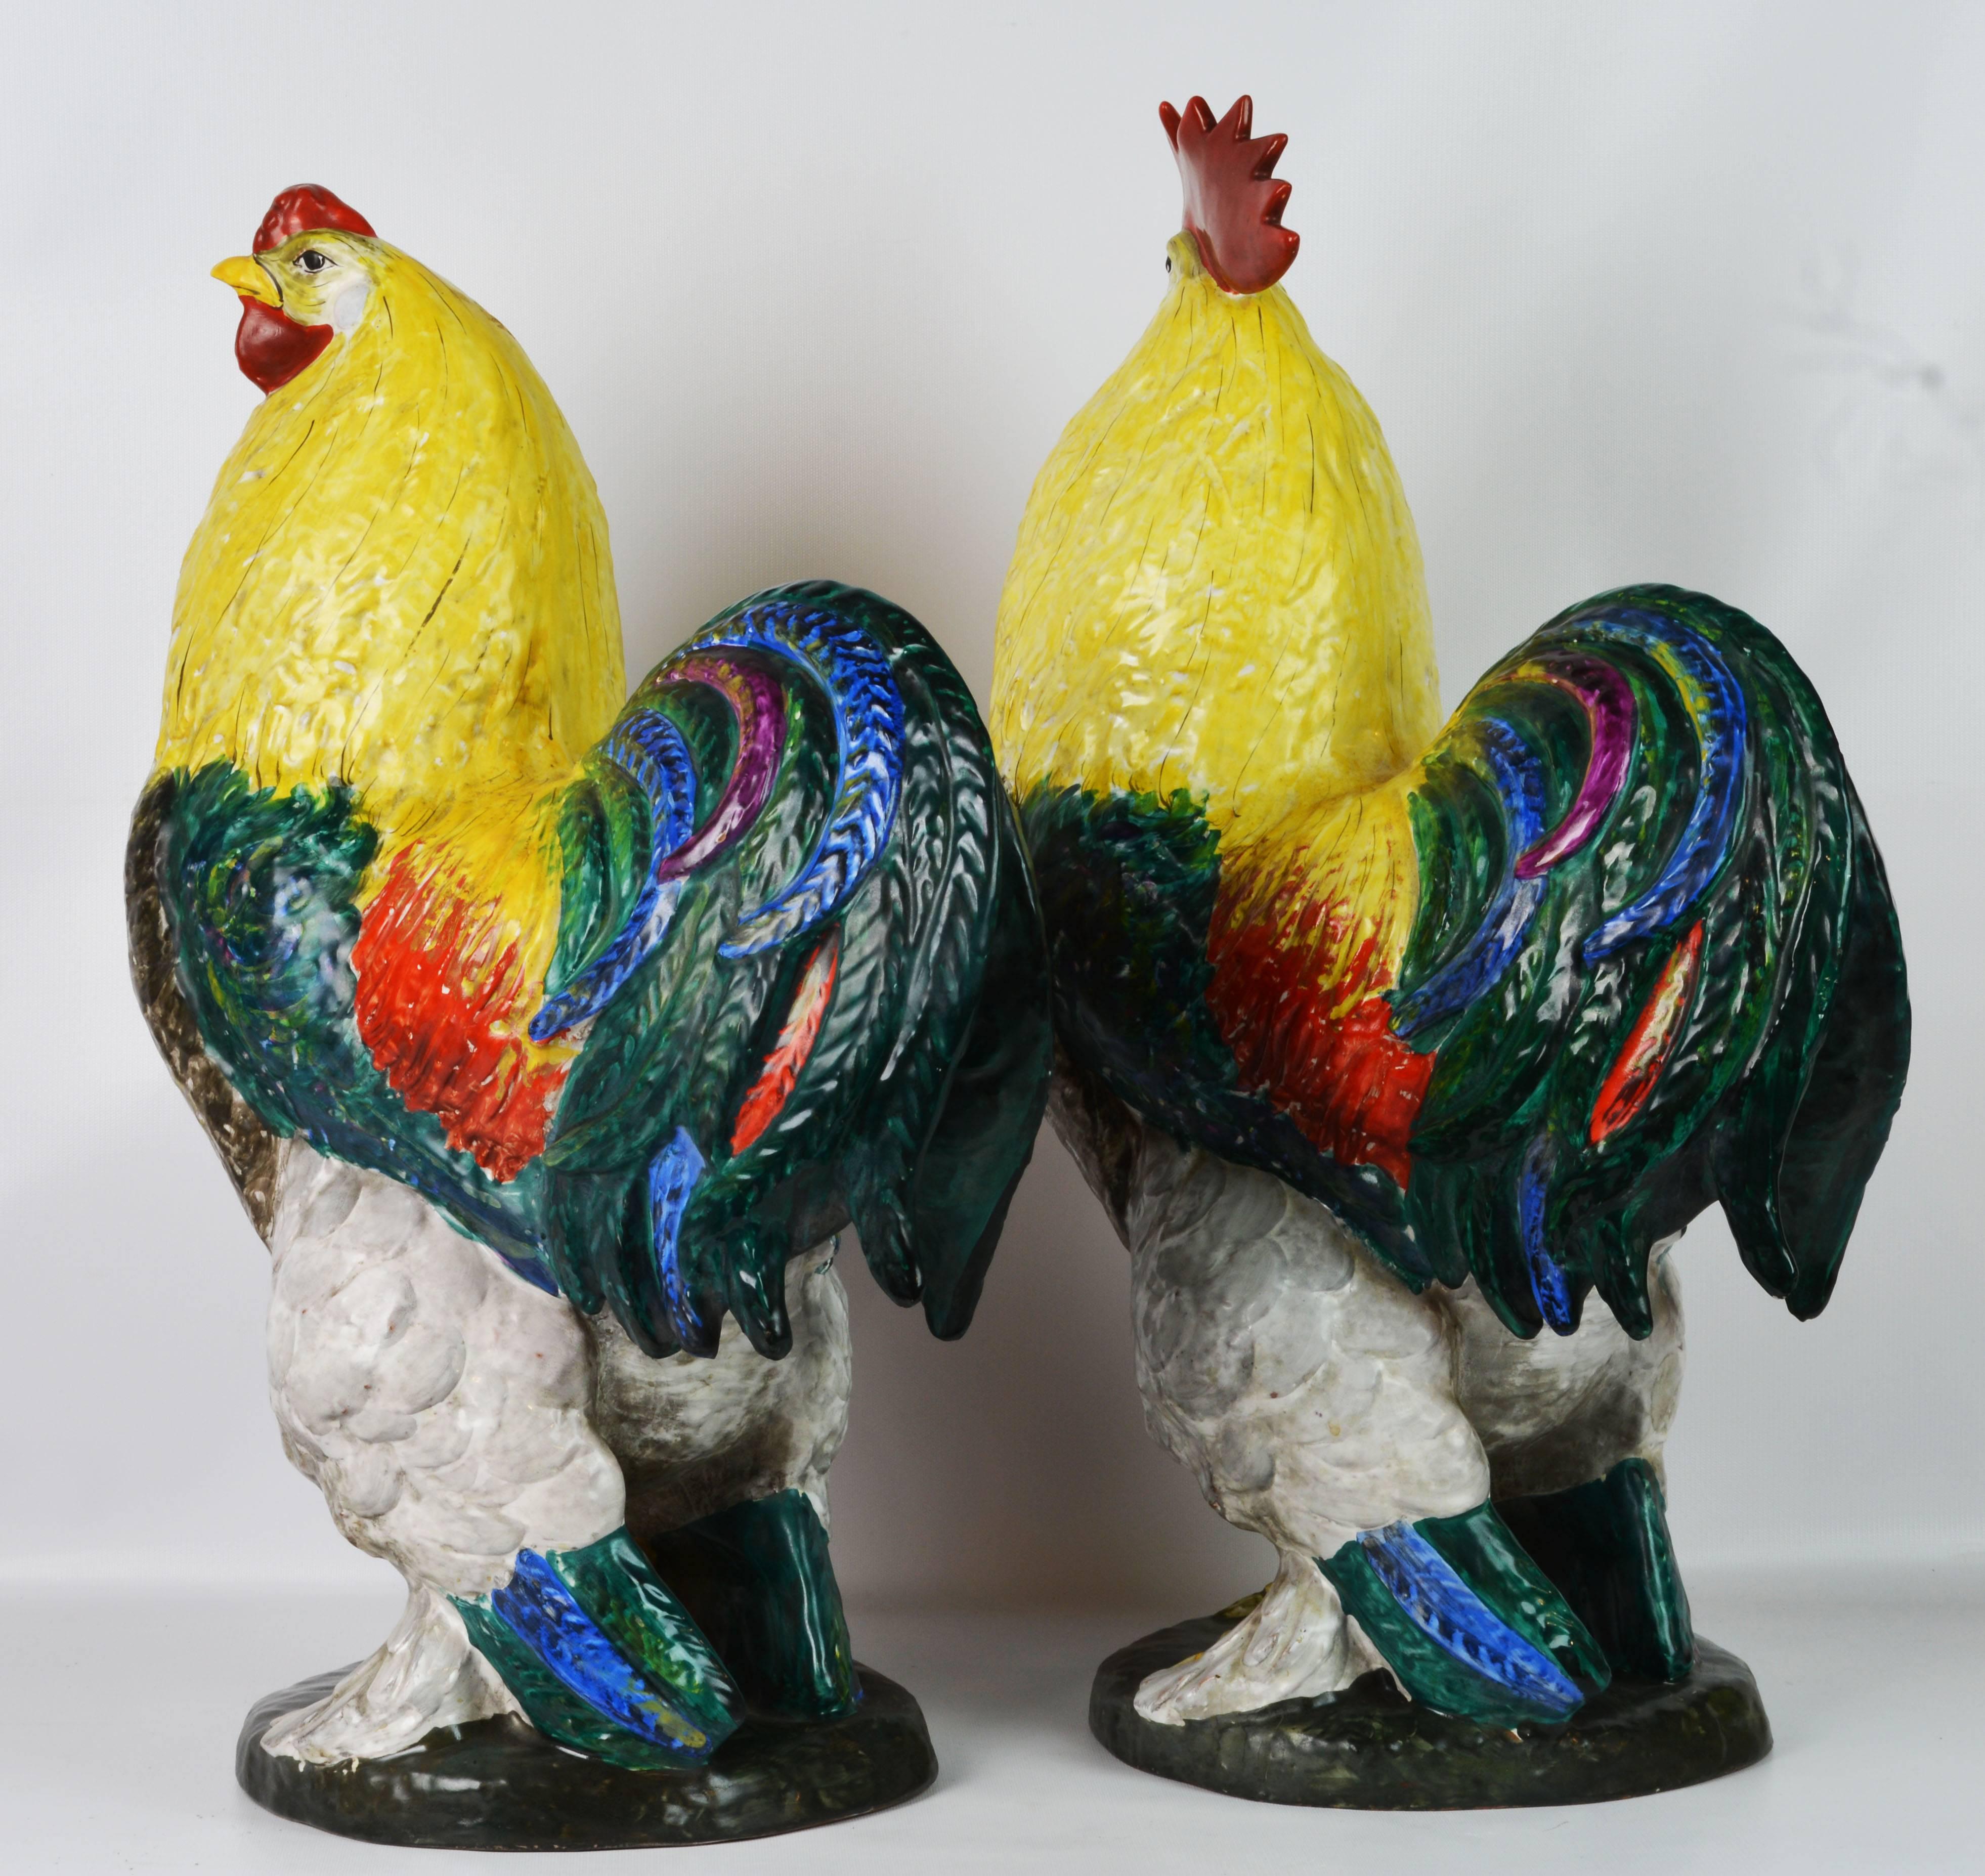 Glazed Huge and Colorful Italian Majolica Sculptures of a Rooster and Hen